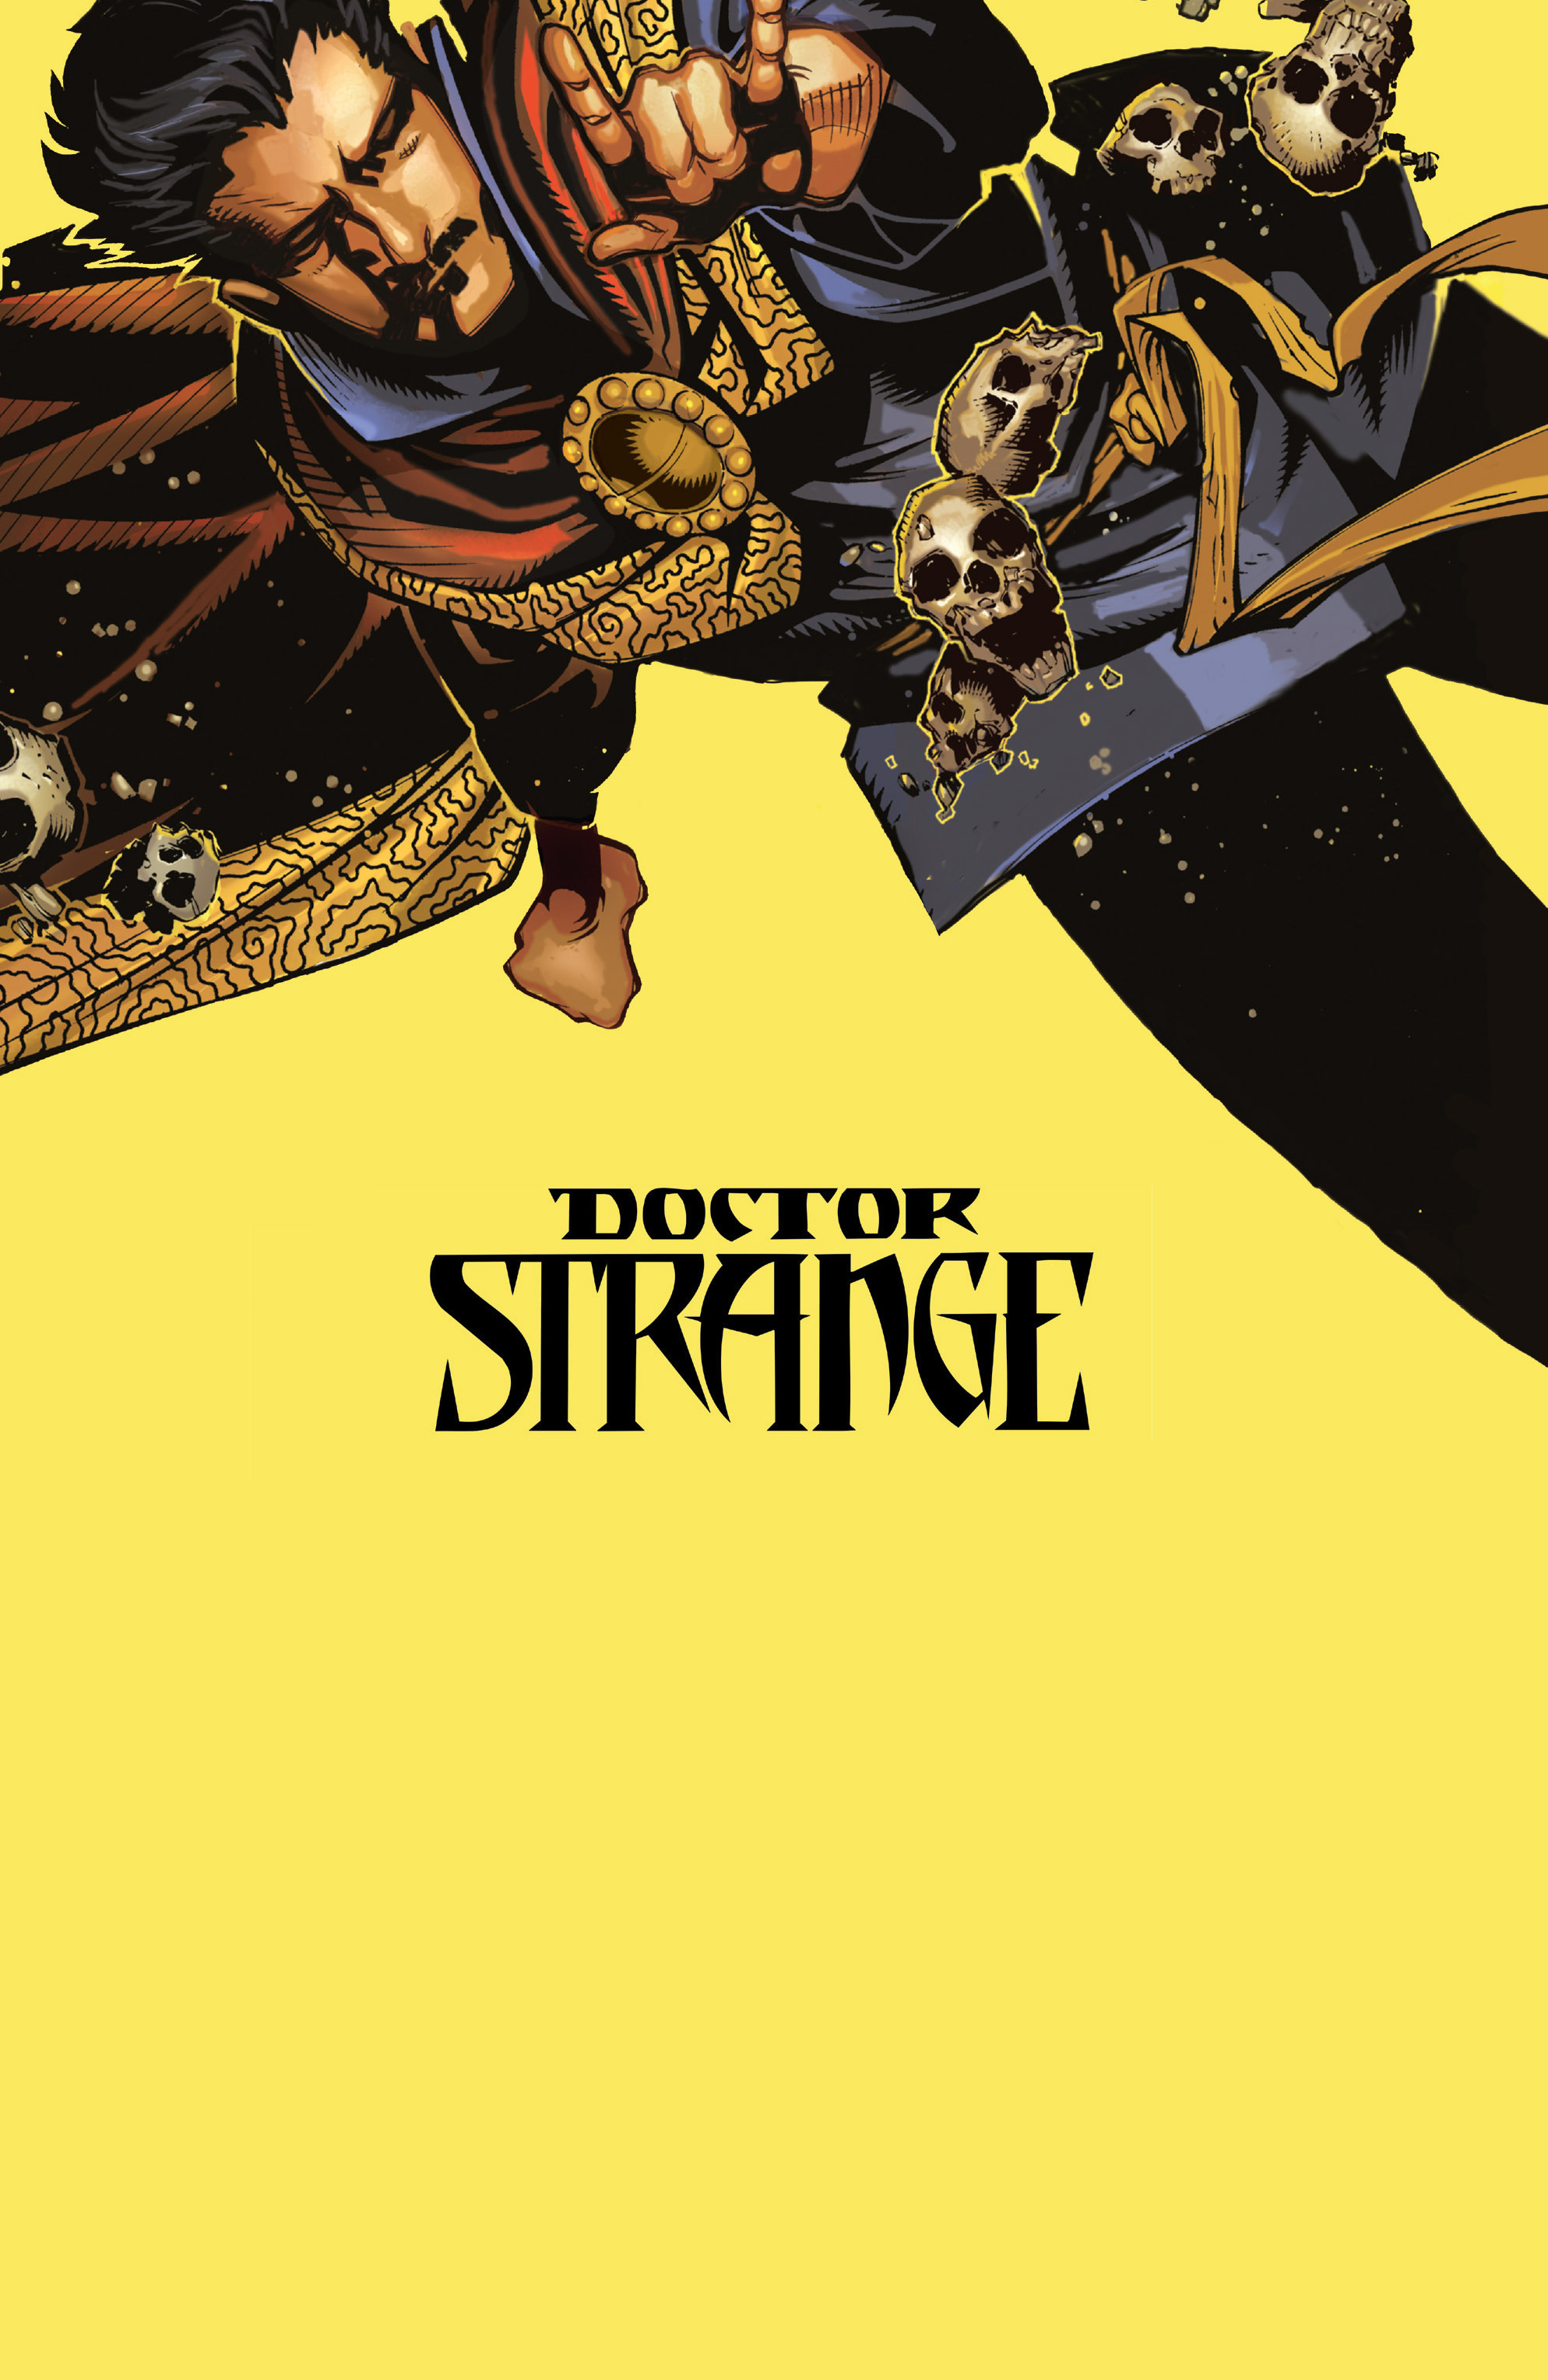 Read online Doctor Strange Vol. 2: The Last Days of Magic comic -  Issue # TPB - 23